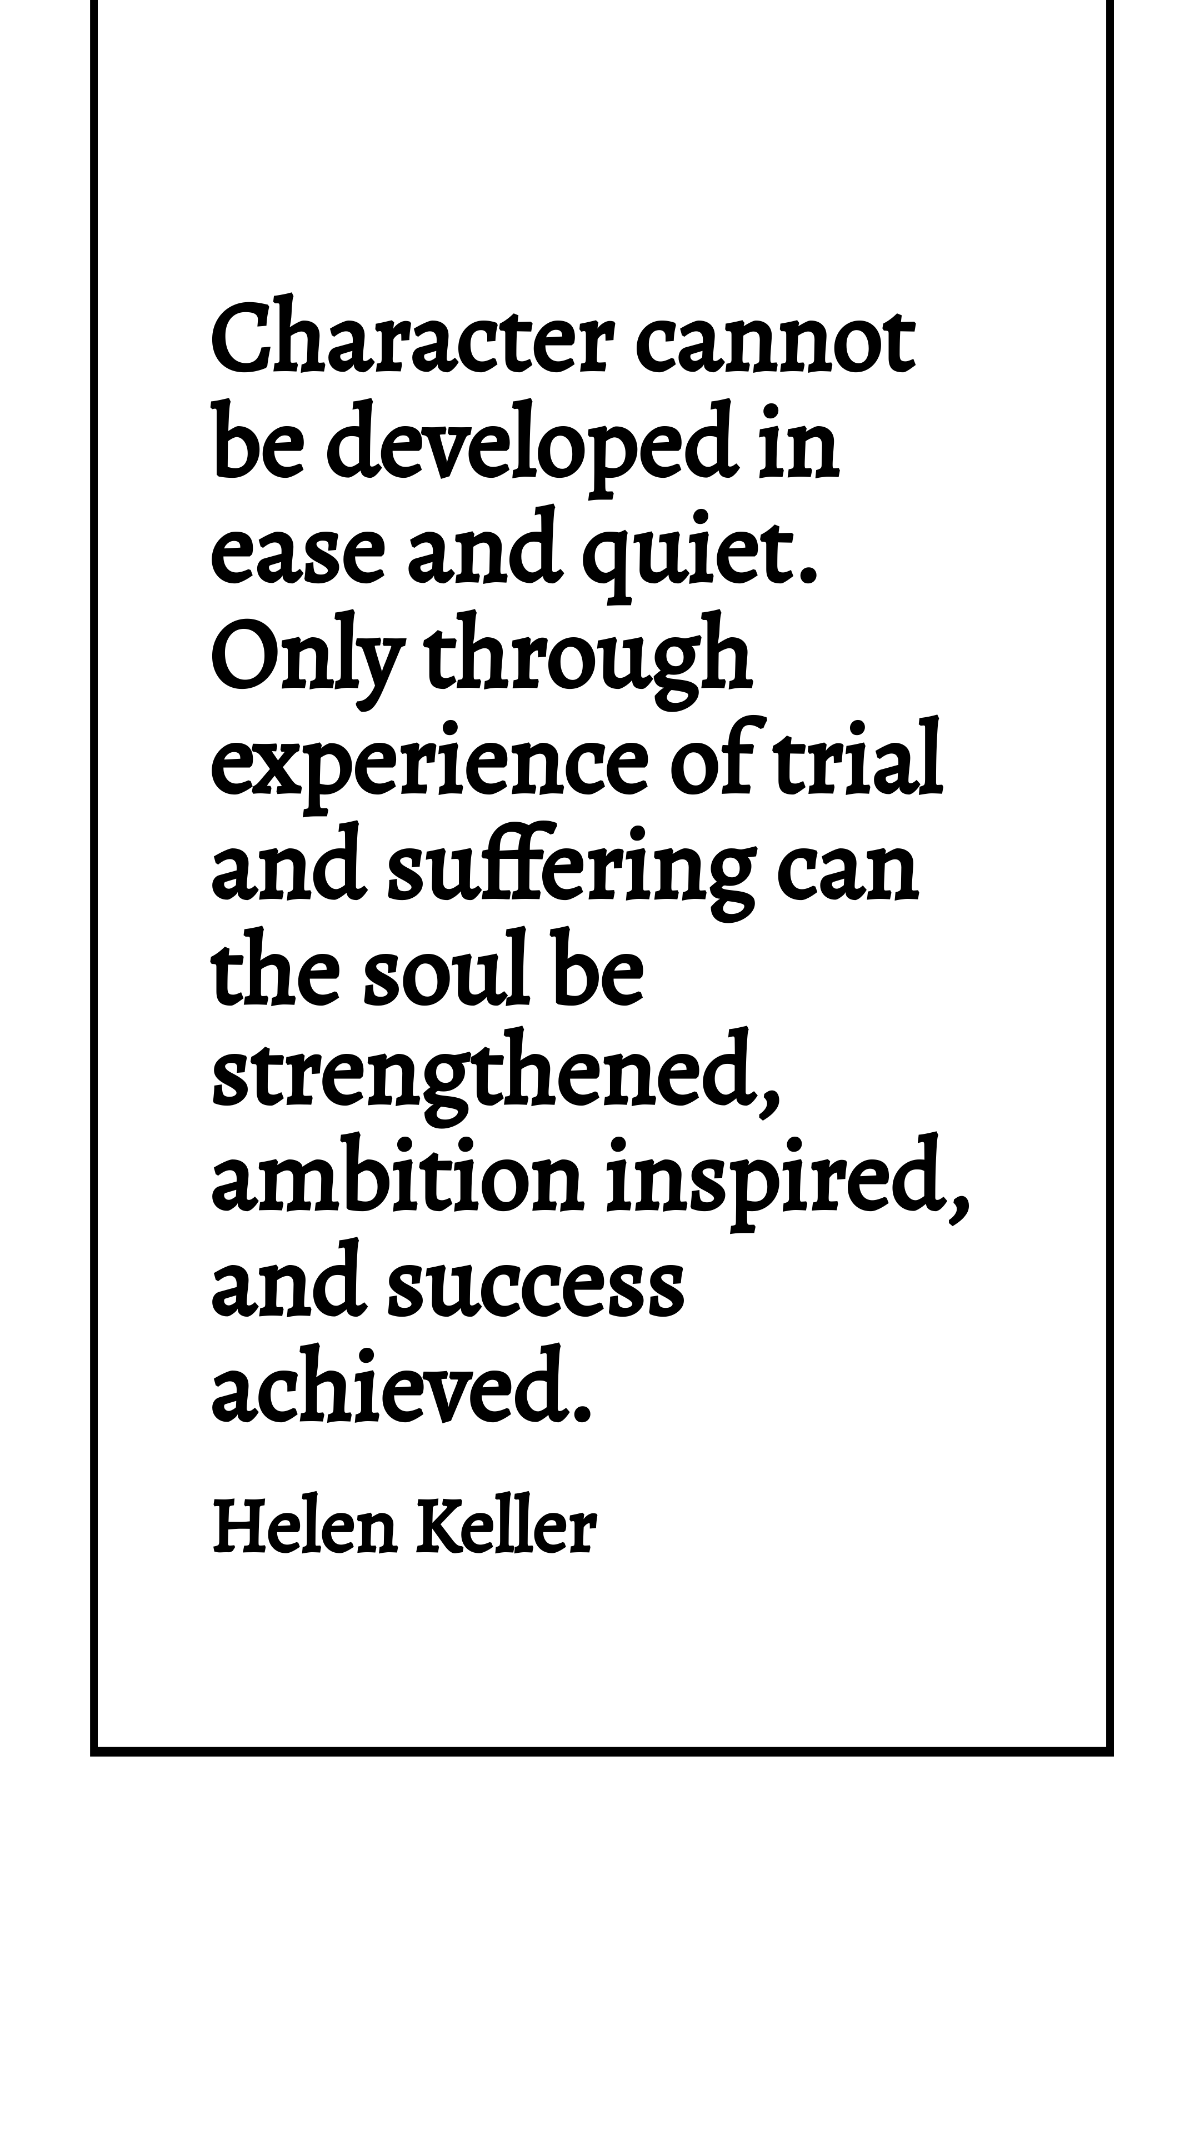 Helen Keller - Character cannot be developed in ease and quiet. Only through experience of trial and suffering can the soul be strengthened, ambition inspired, and success achieved. Template